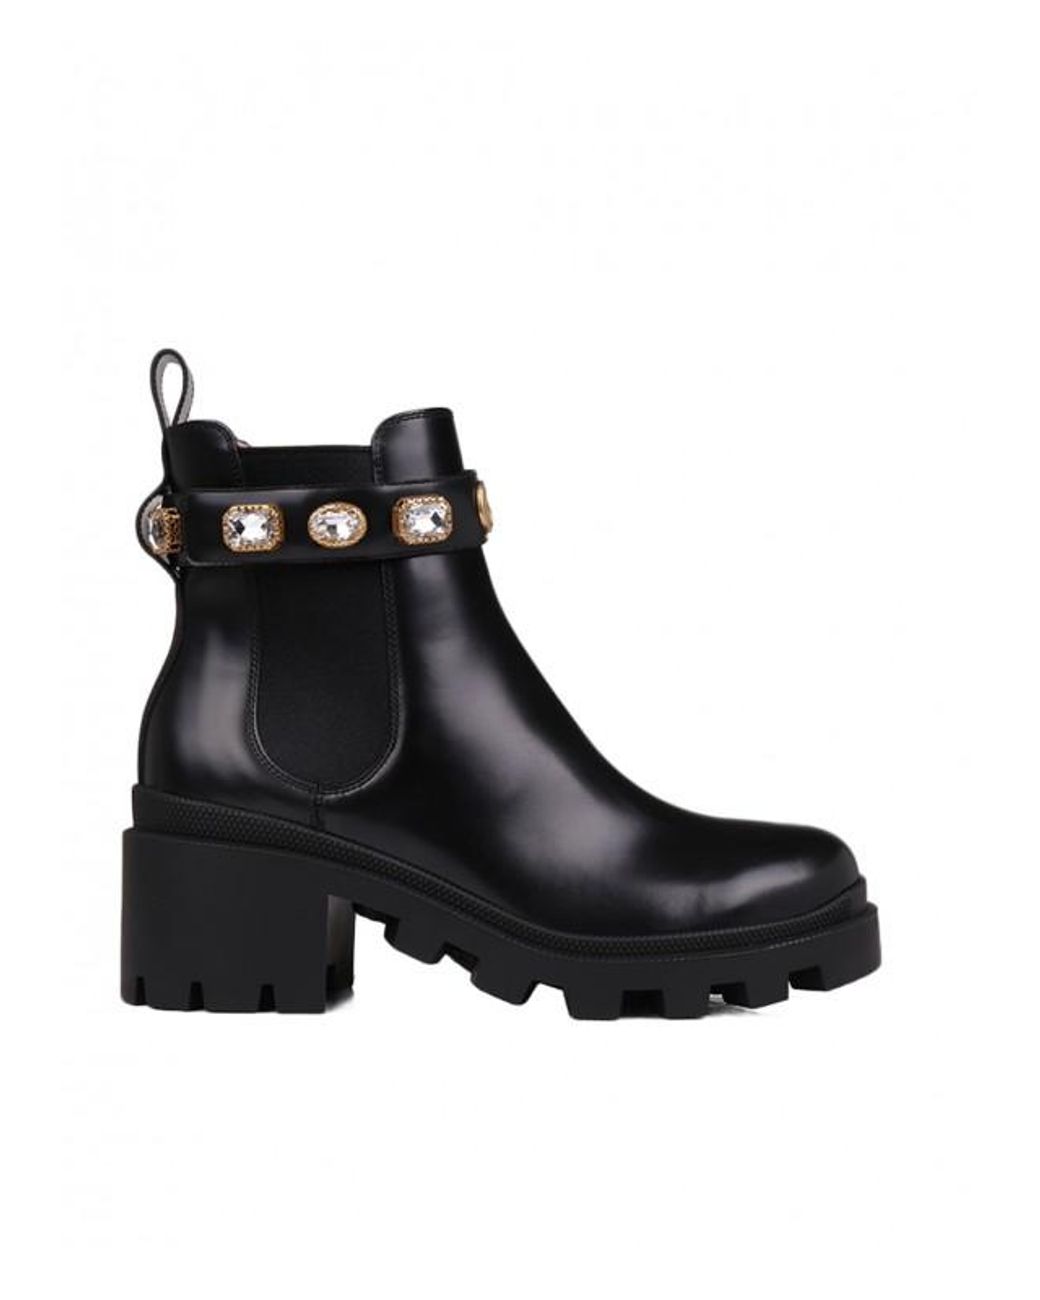 Lyst - Gucci Trip Embellished Leather Chelsea Boots in Black - Save 25%